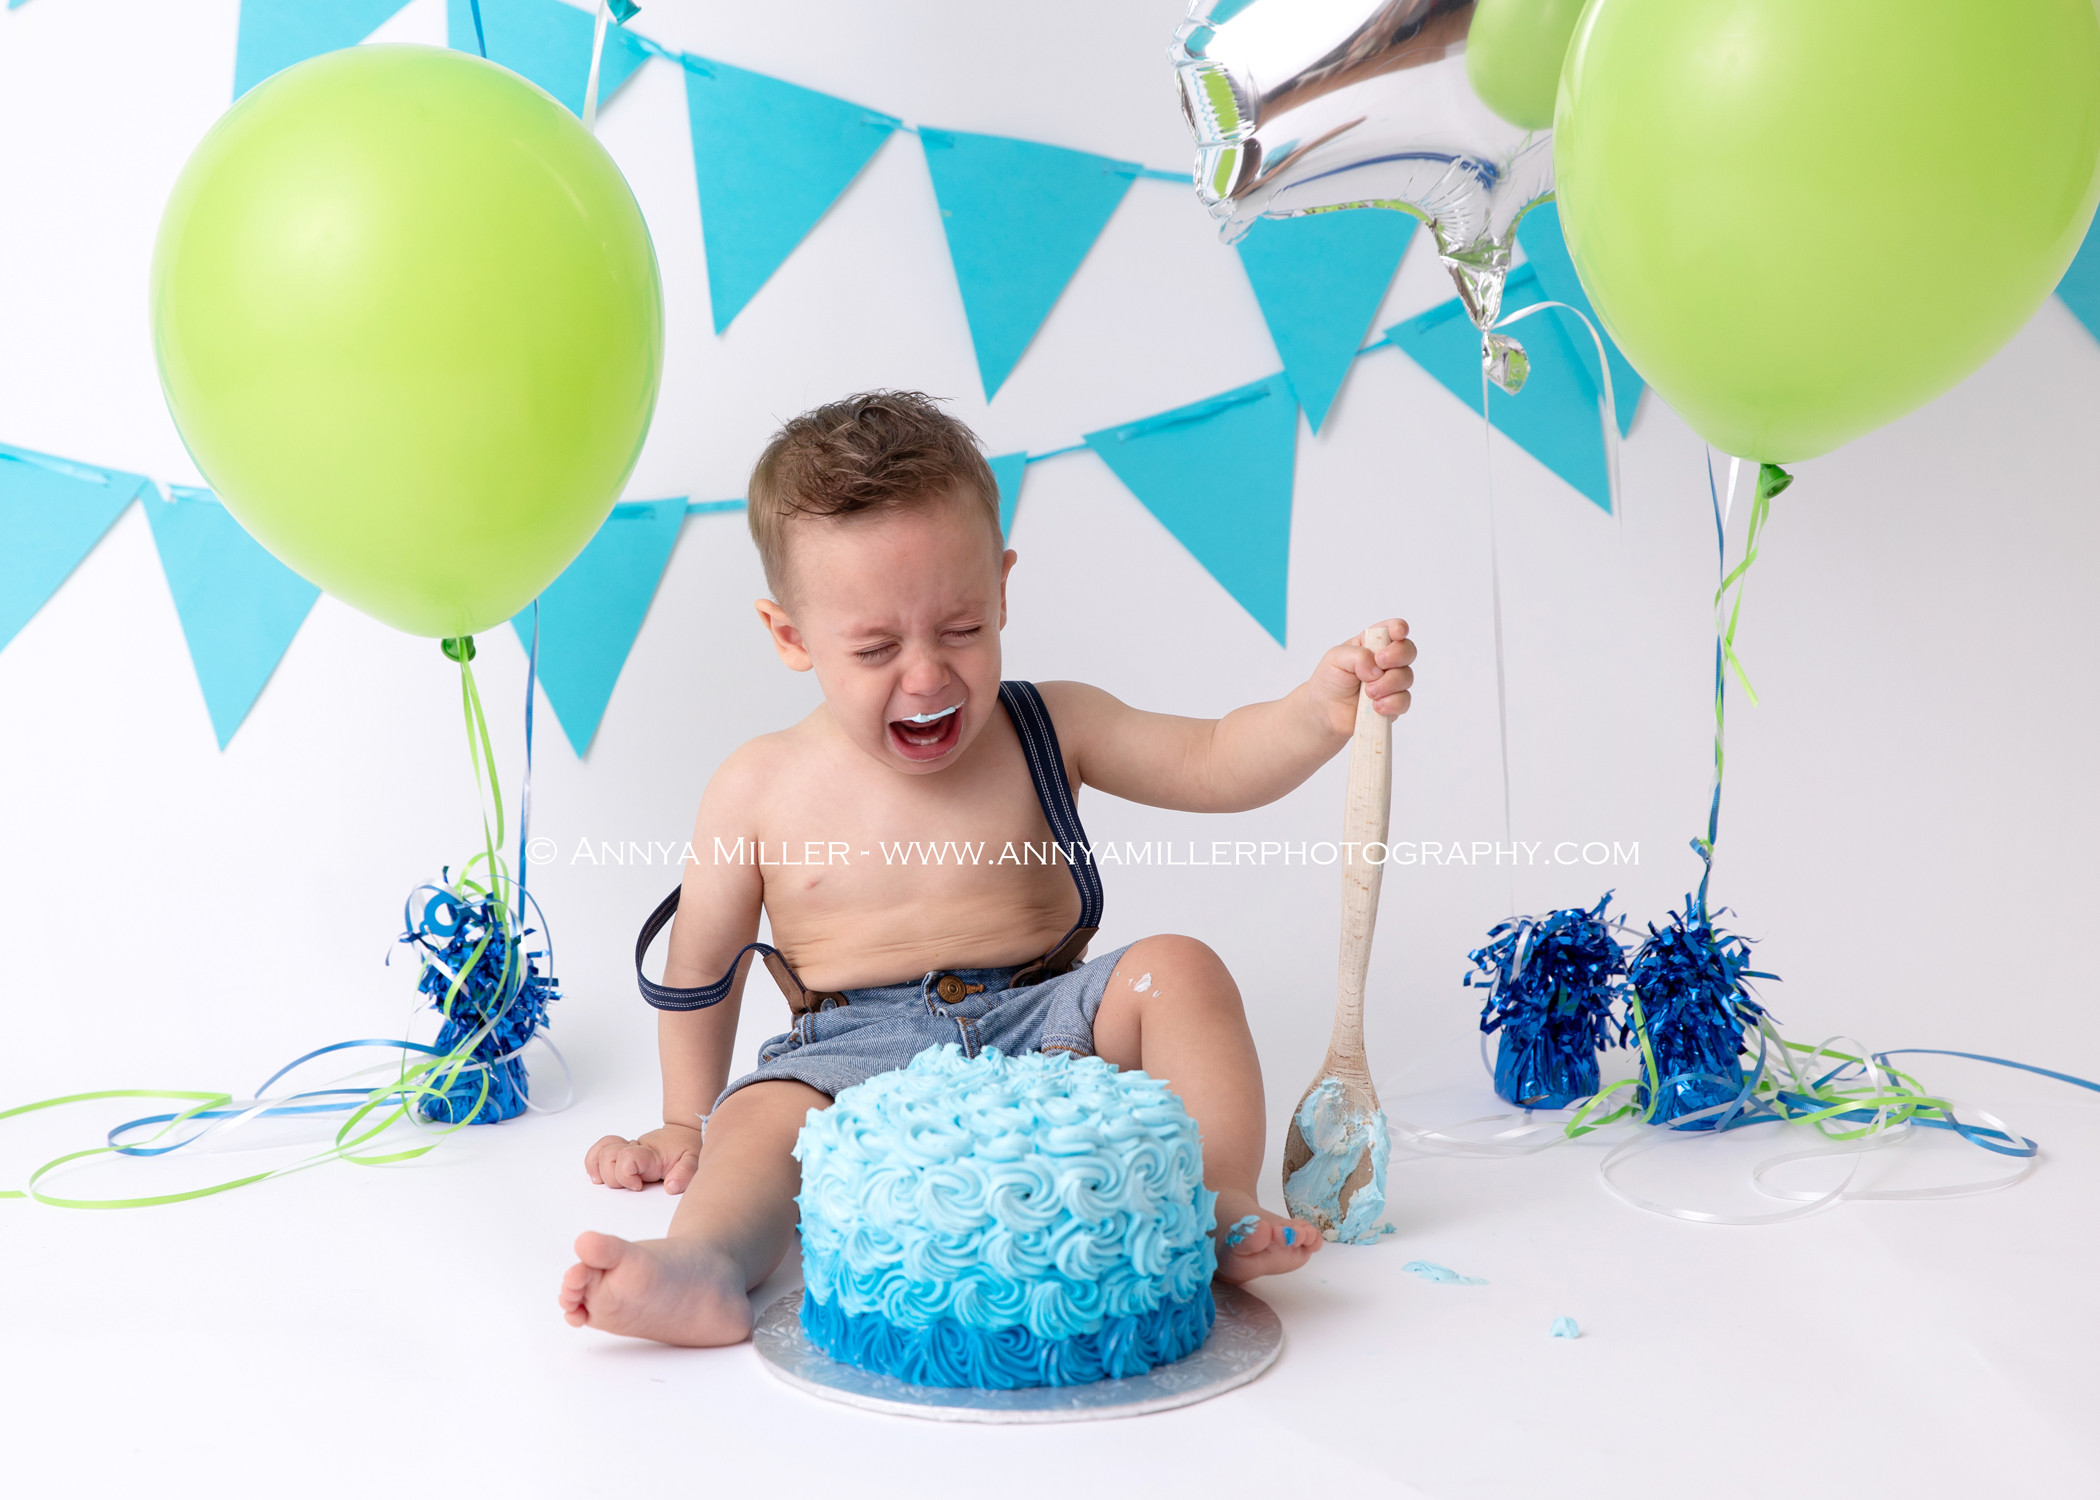 First birthday portraits of the sweetest little boy for his Toronto Area Cake Smash - Annya Miller Photography - www.annyamillerphotography.com